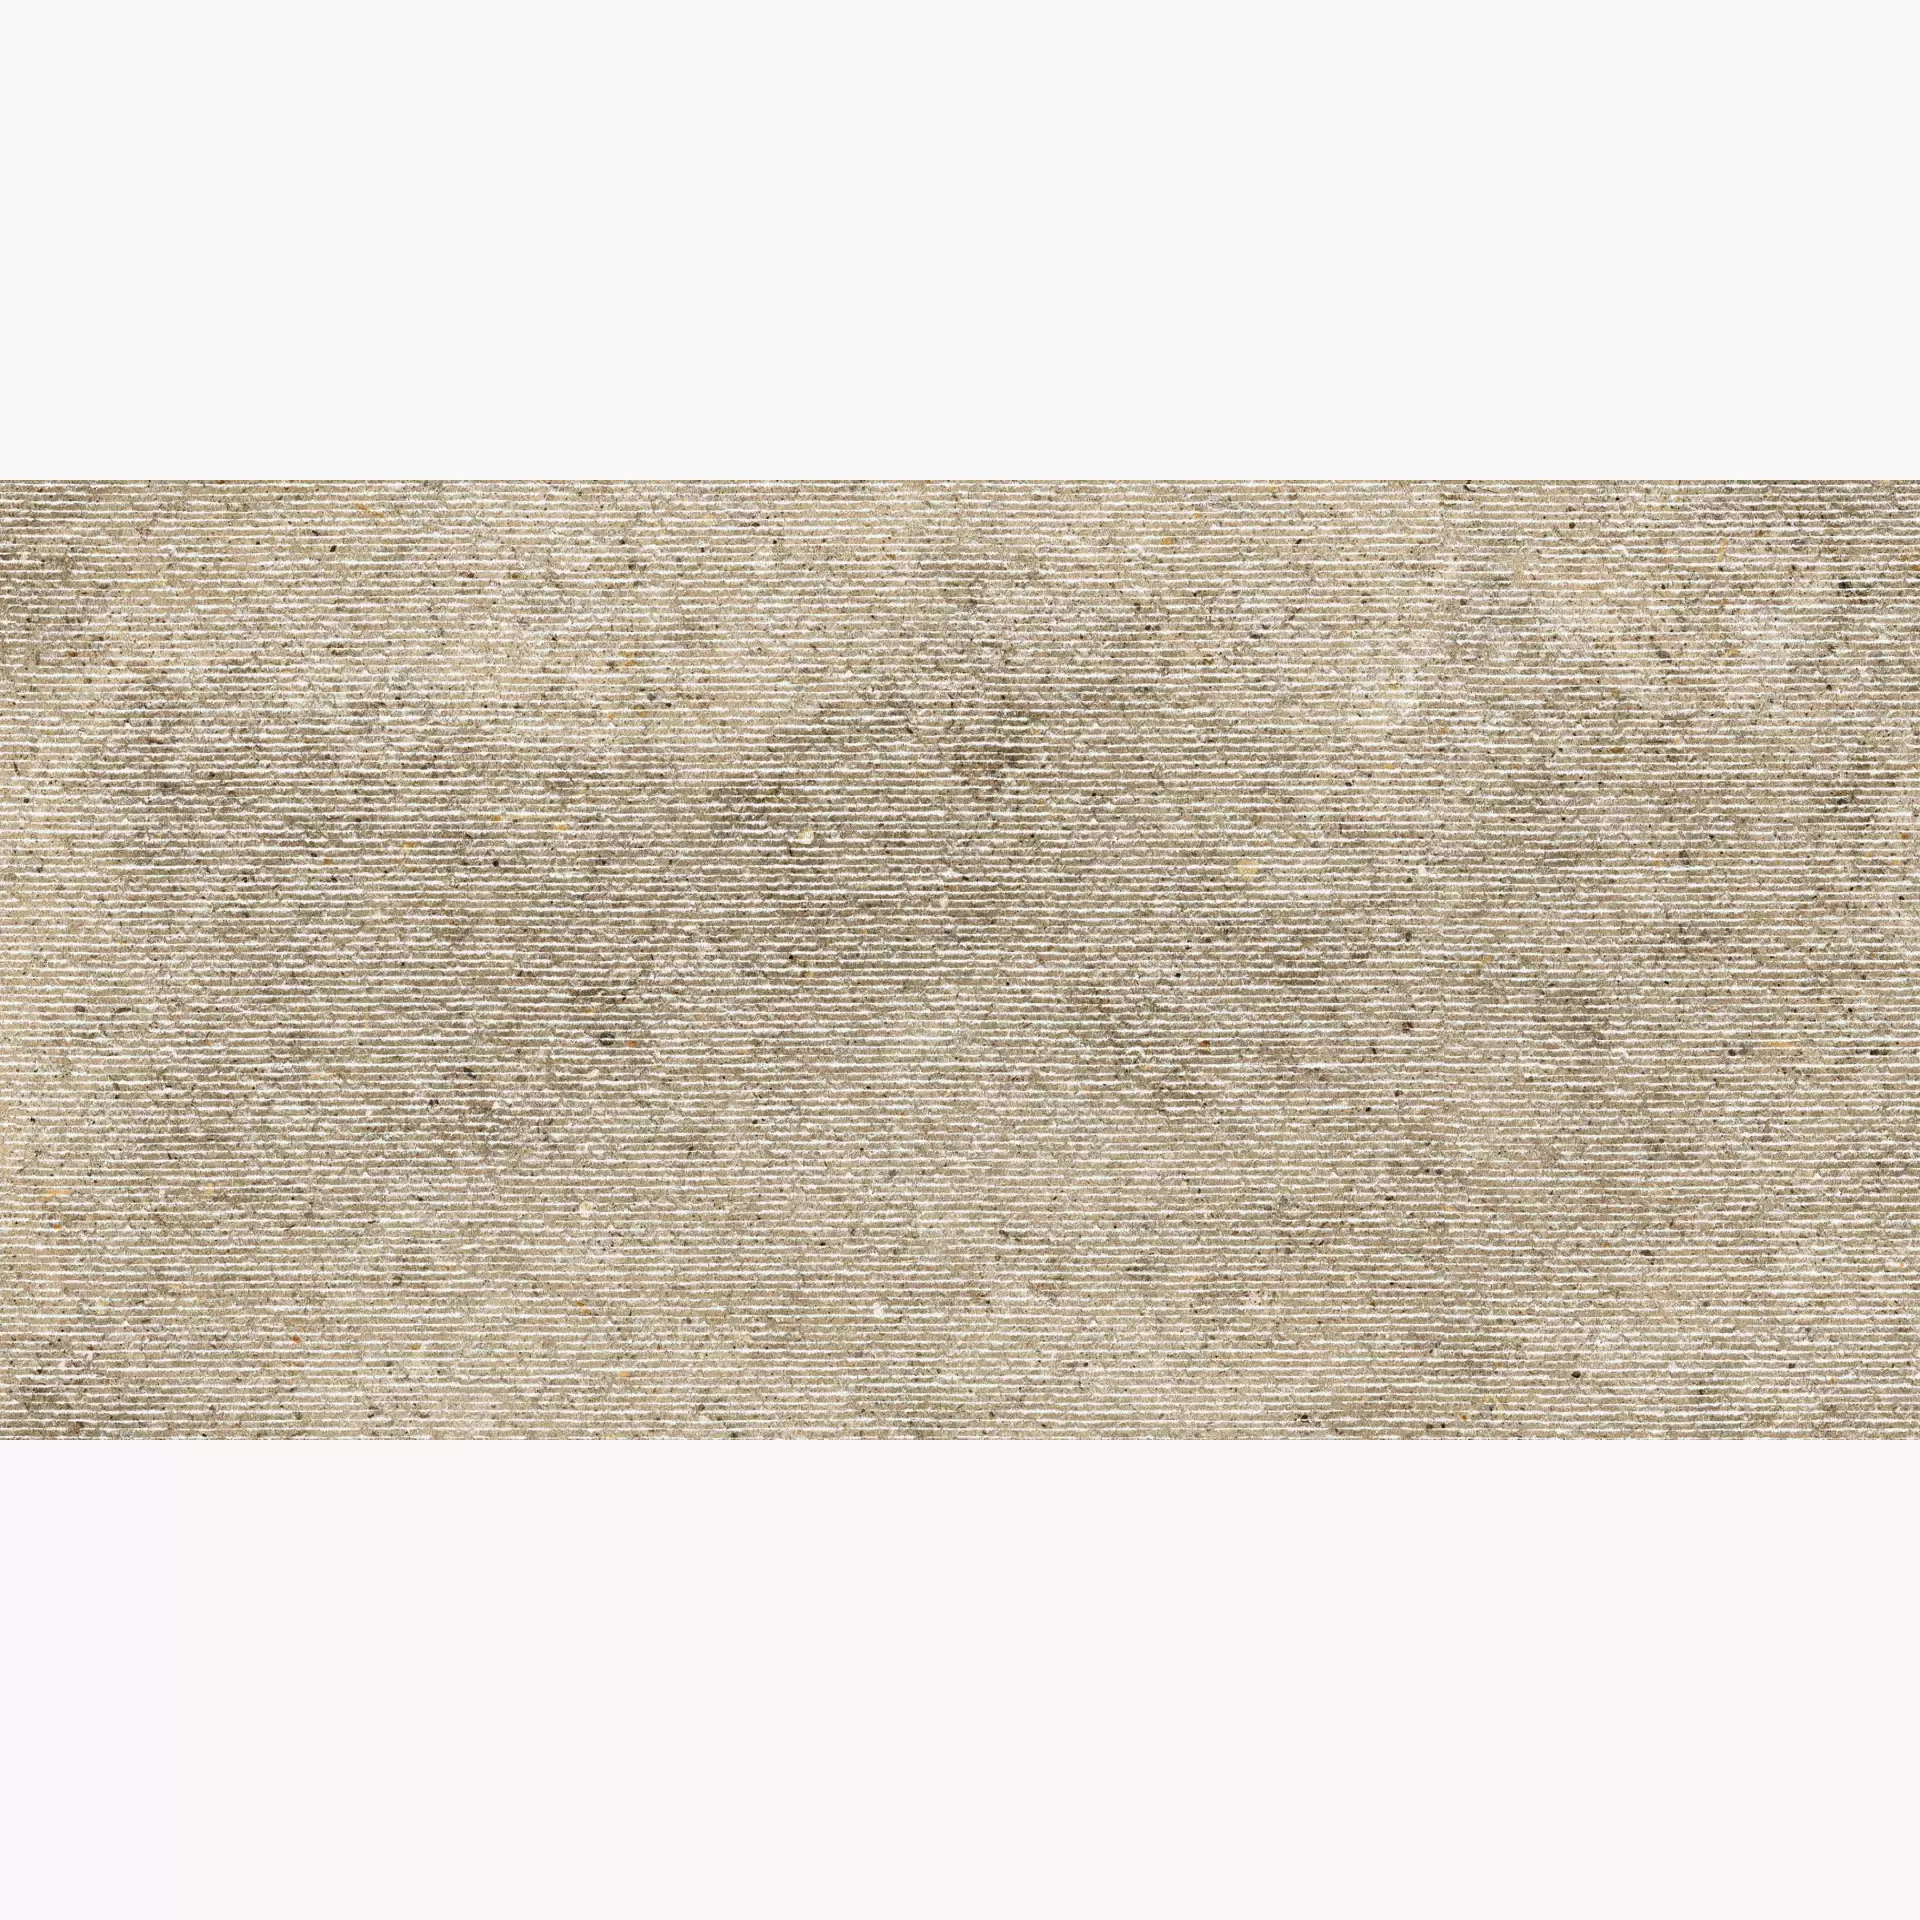 ABK Poetry Stone Ecru Naturale Decor Carving PF60010803 60x120cm rectified 8,5mm